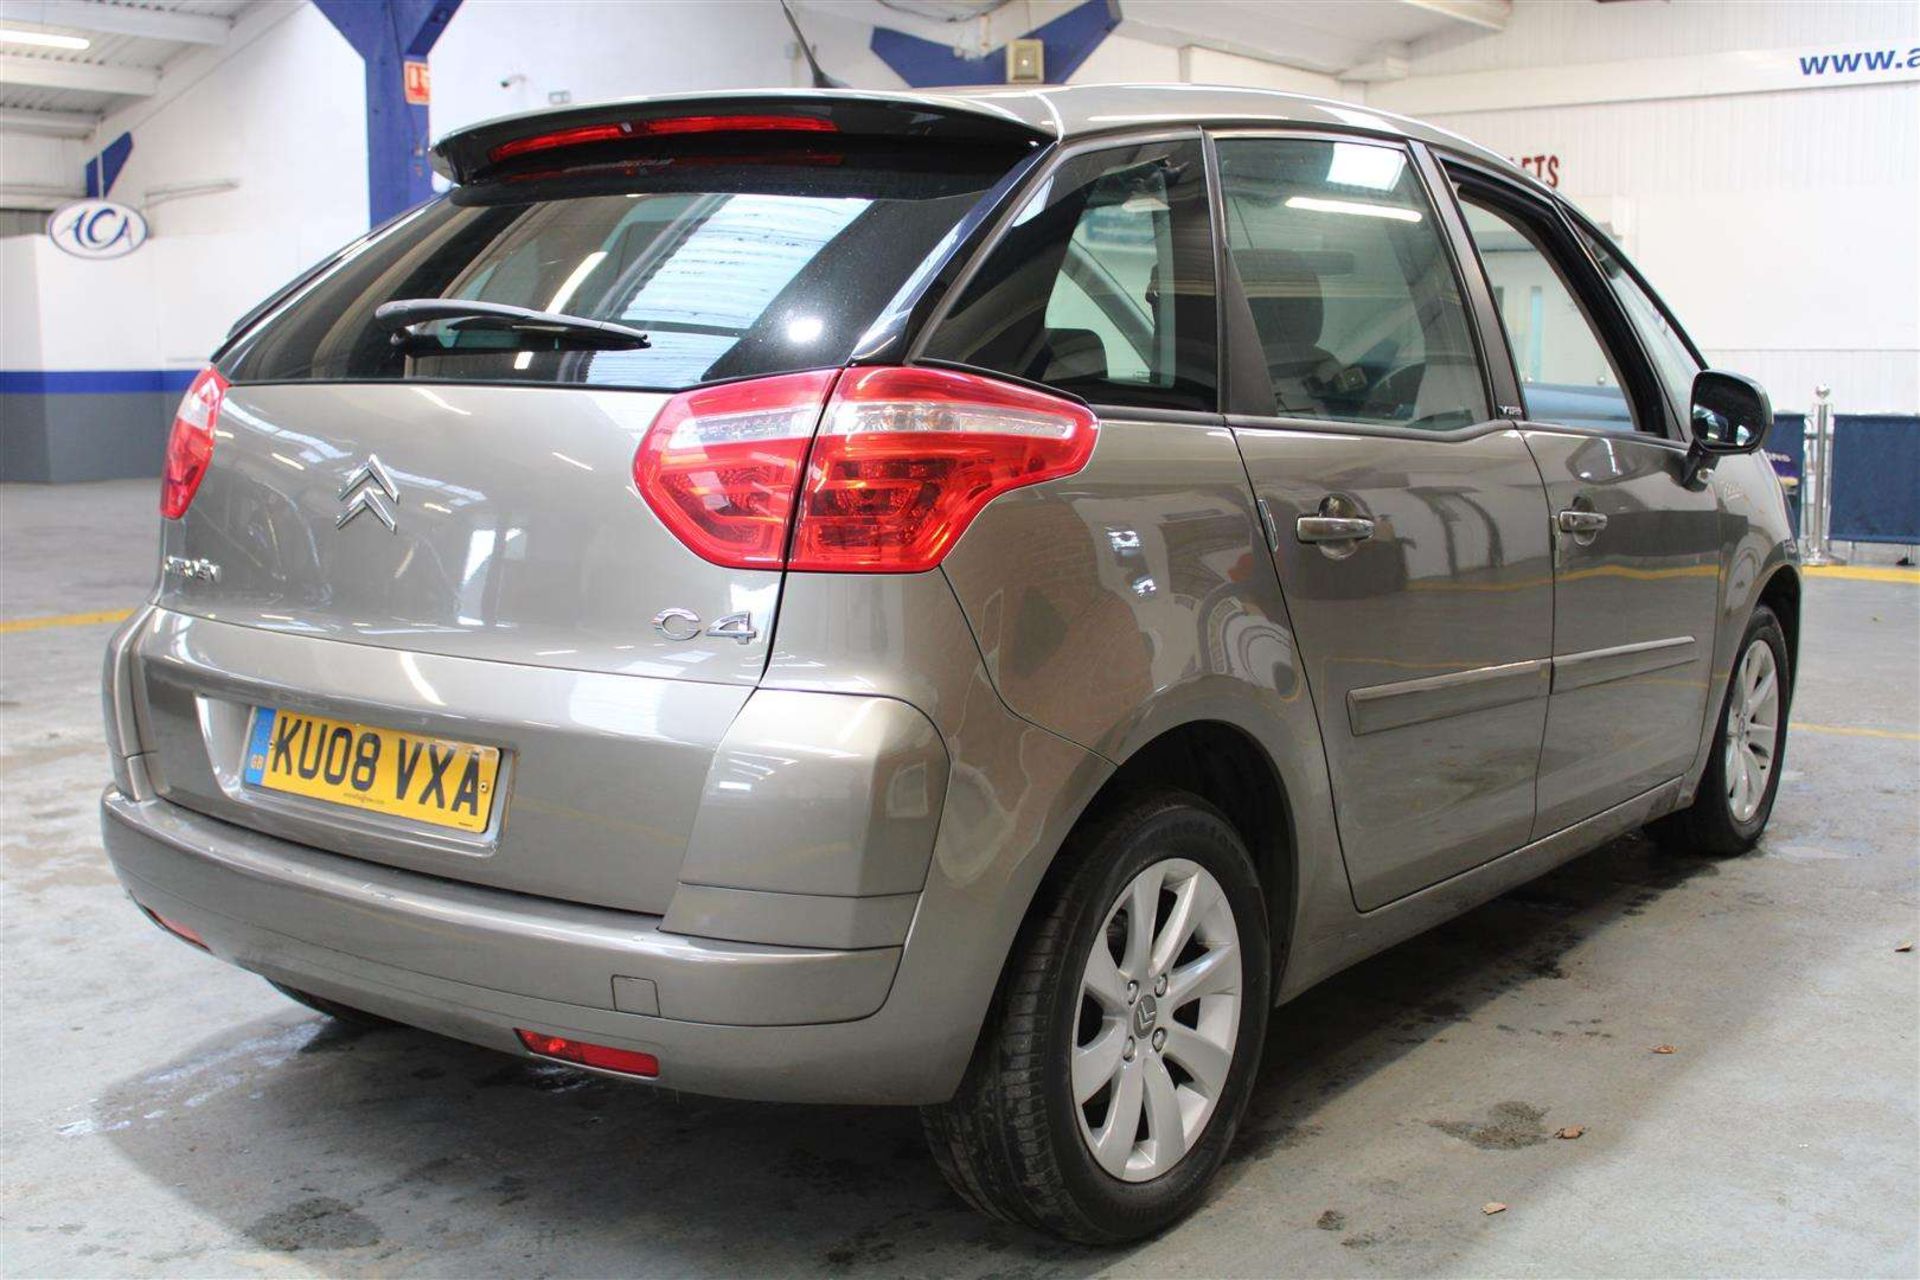 2008 CITROEN C4 PICASSO 5 VTR+ HDI EGS AUTO - Image 9 of 23